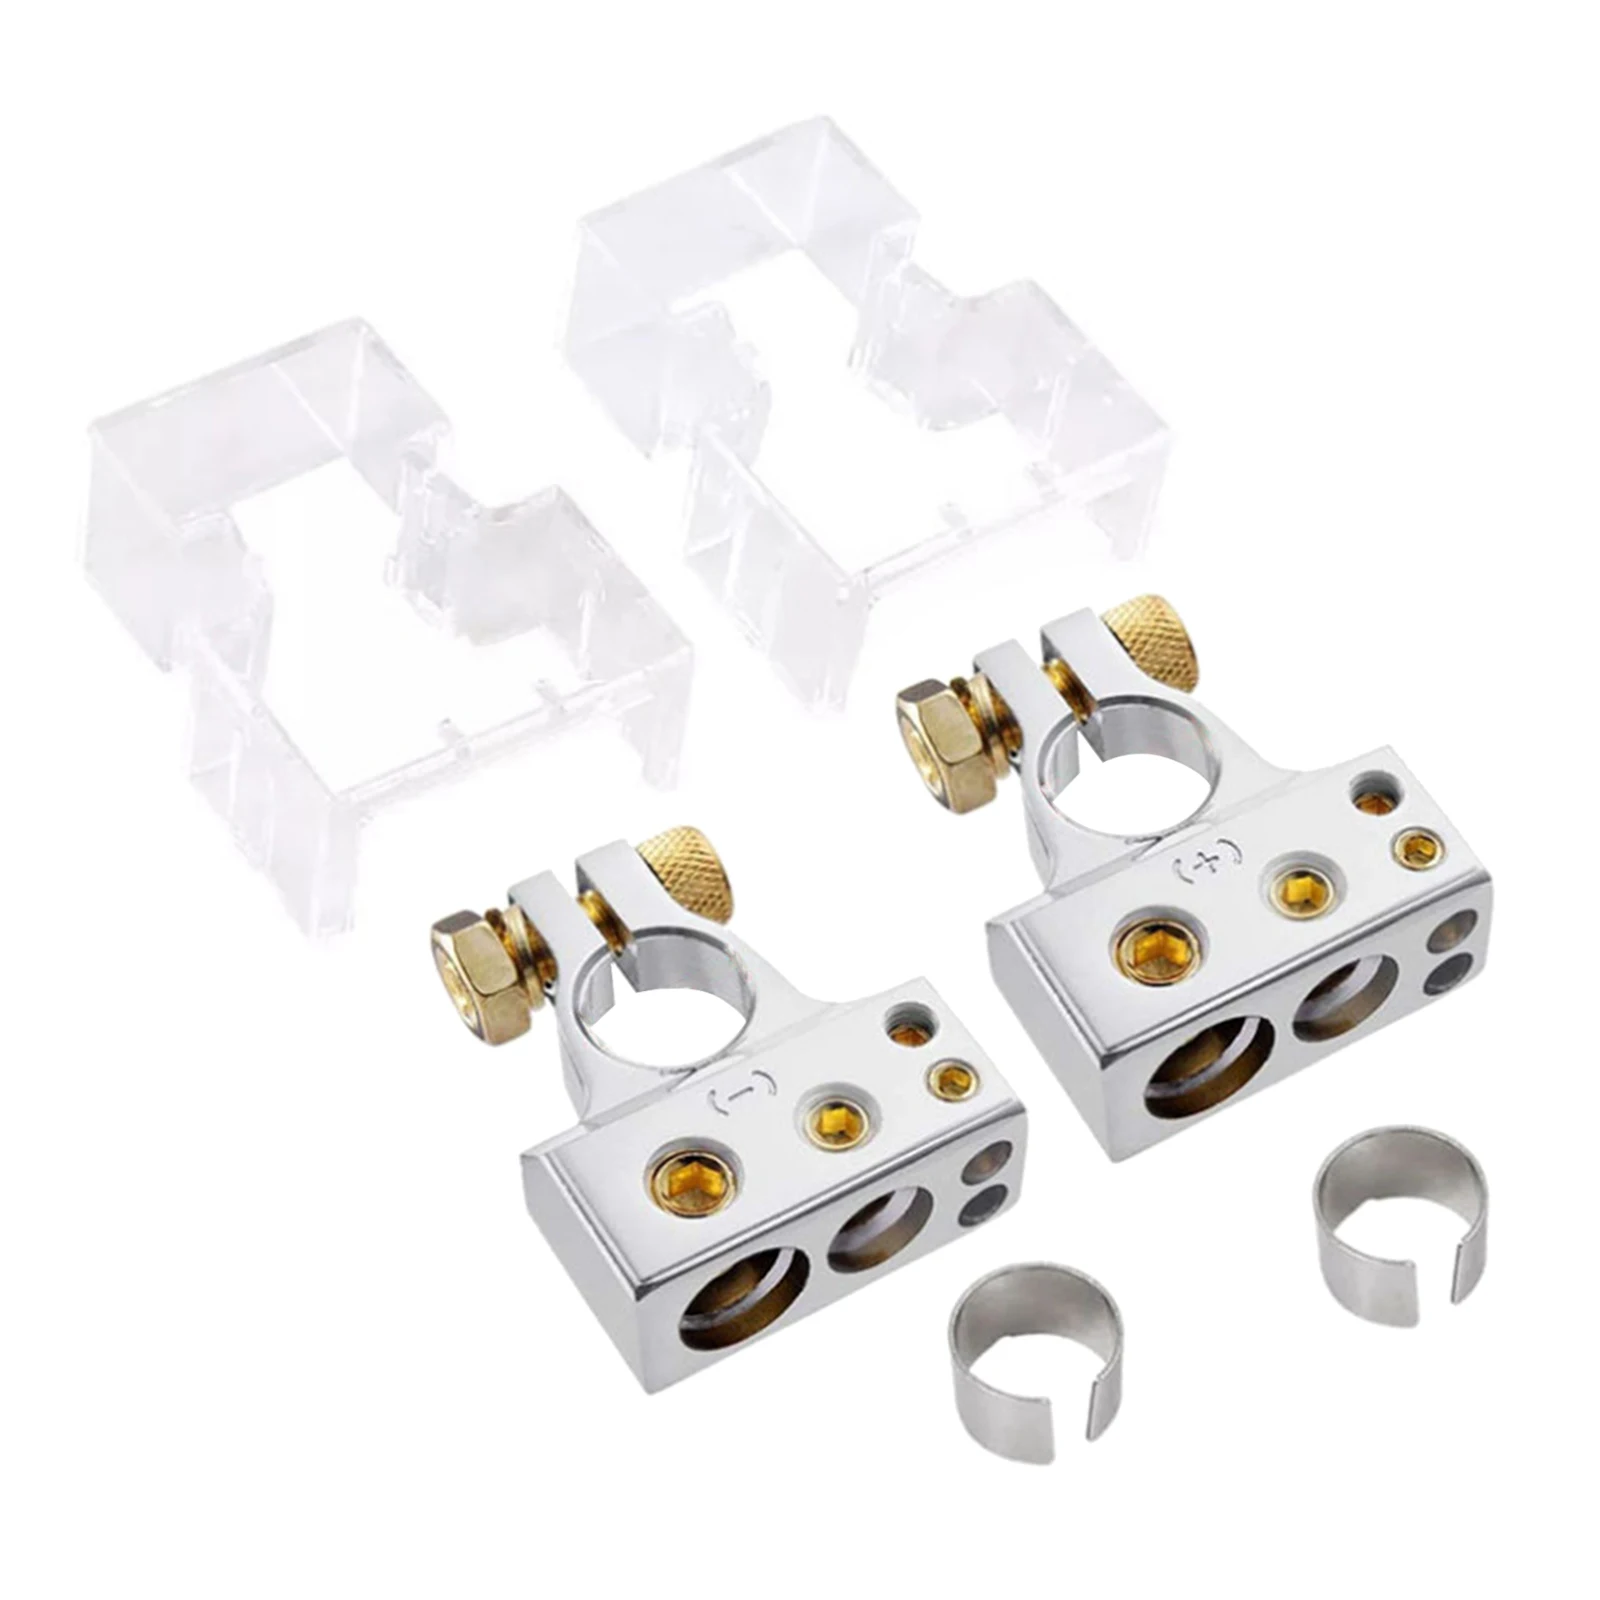 2 Packs Zinc Alloy Vehicles Battery Terminal Connector  Negative Battery  Clear Covers